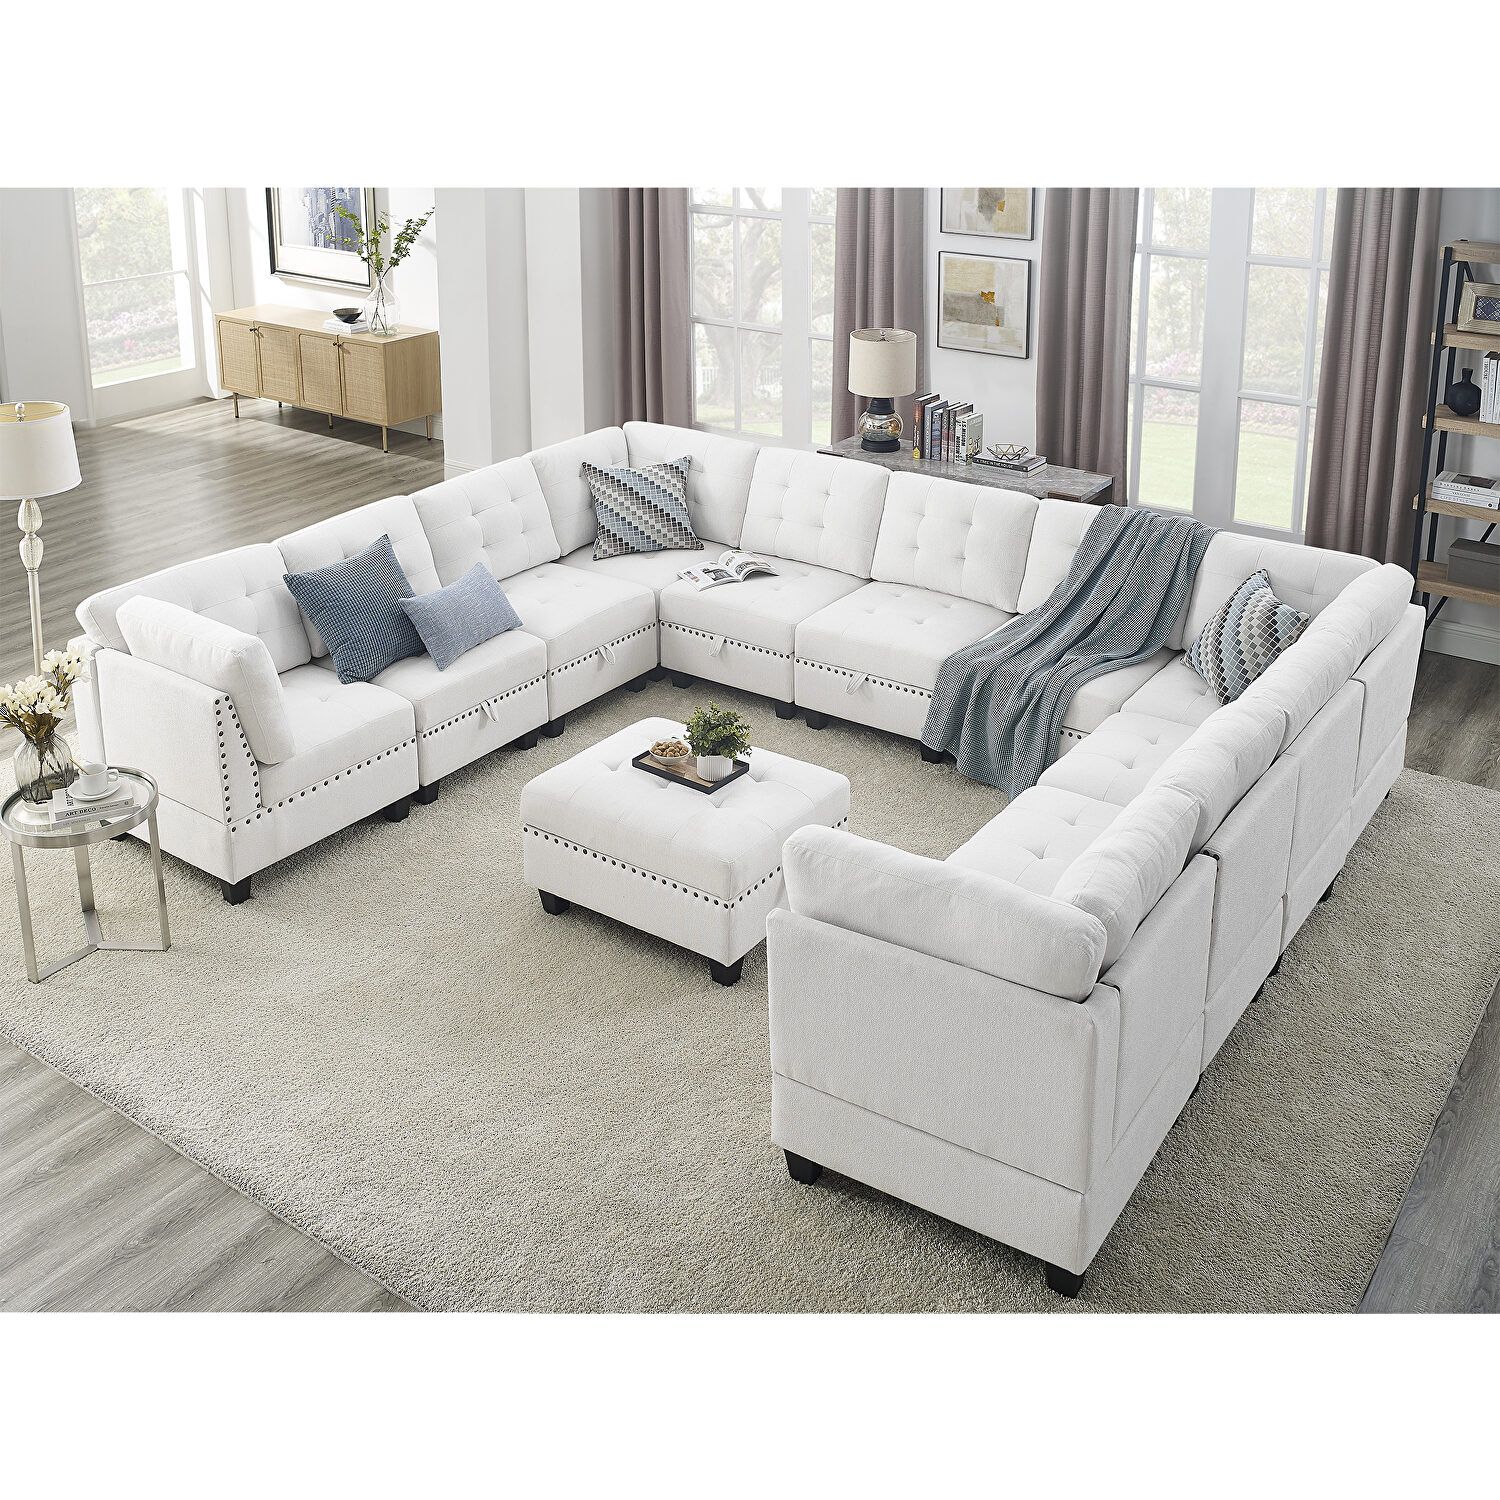 La Spezia Dd240 V Sectional Sofa W487S00125 | Comfyco Intended For U Shaped Modular Sectional Sofas (Photo 10 of 15)